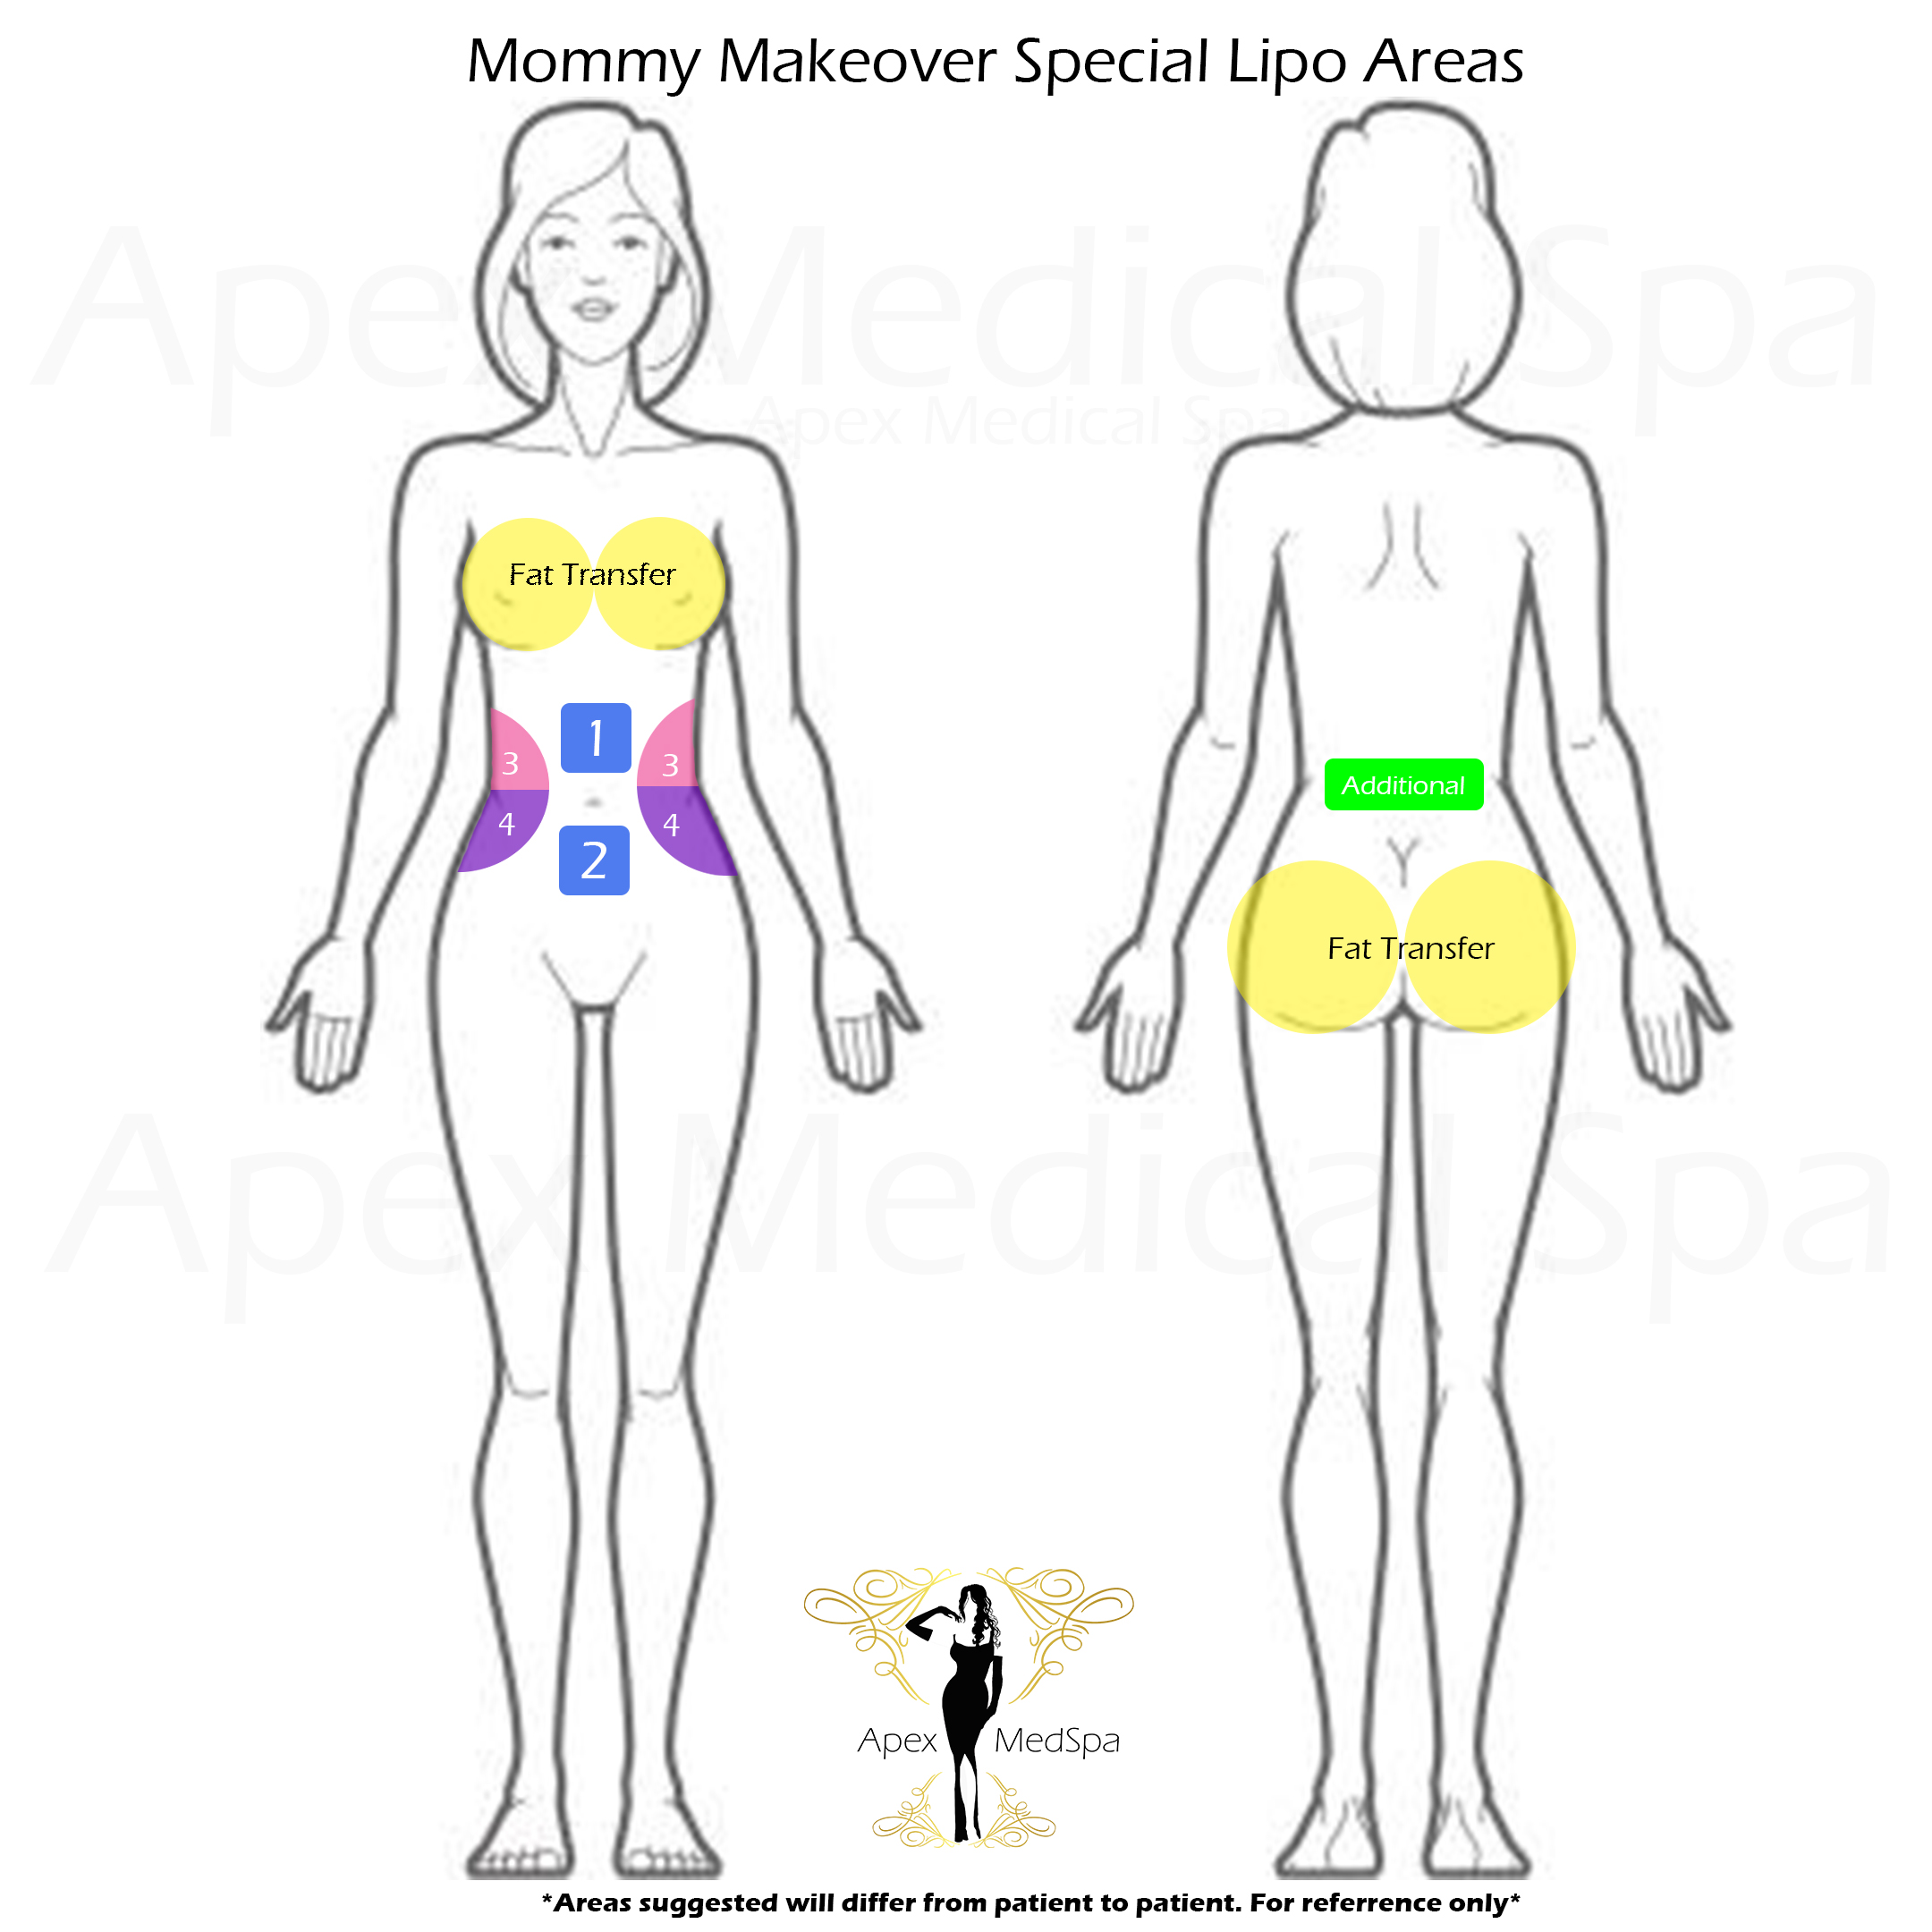 Suggested areas for Mommy Makeover Lipo